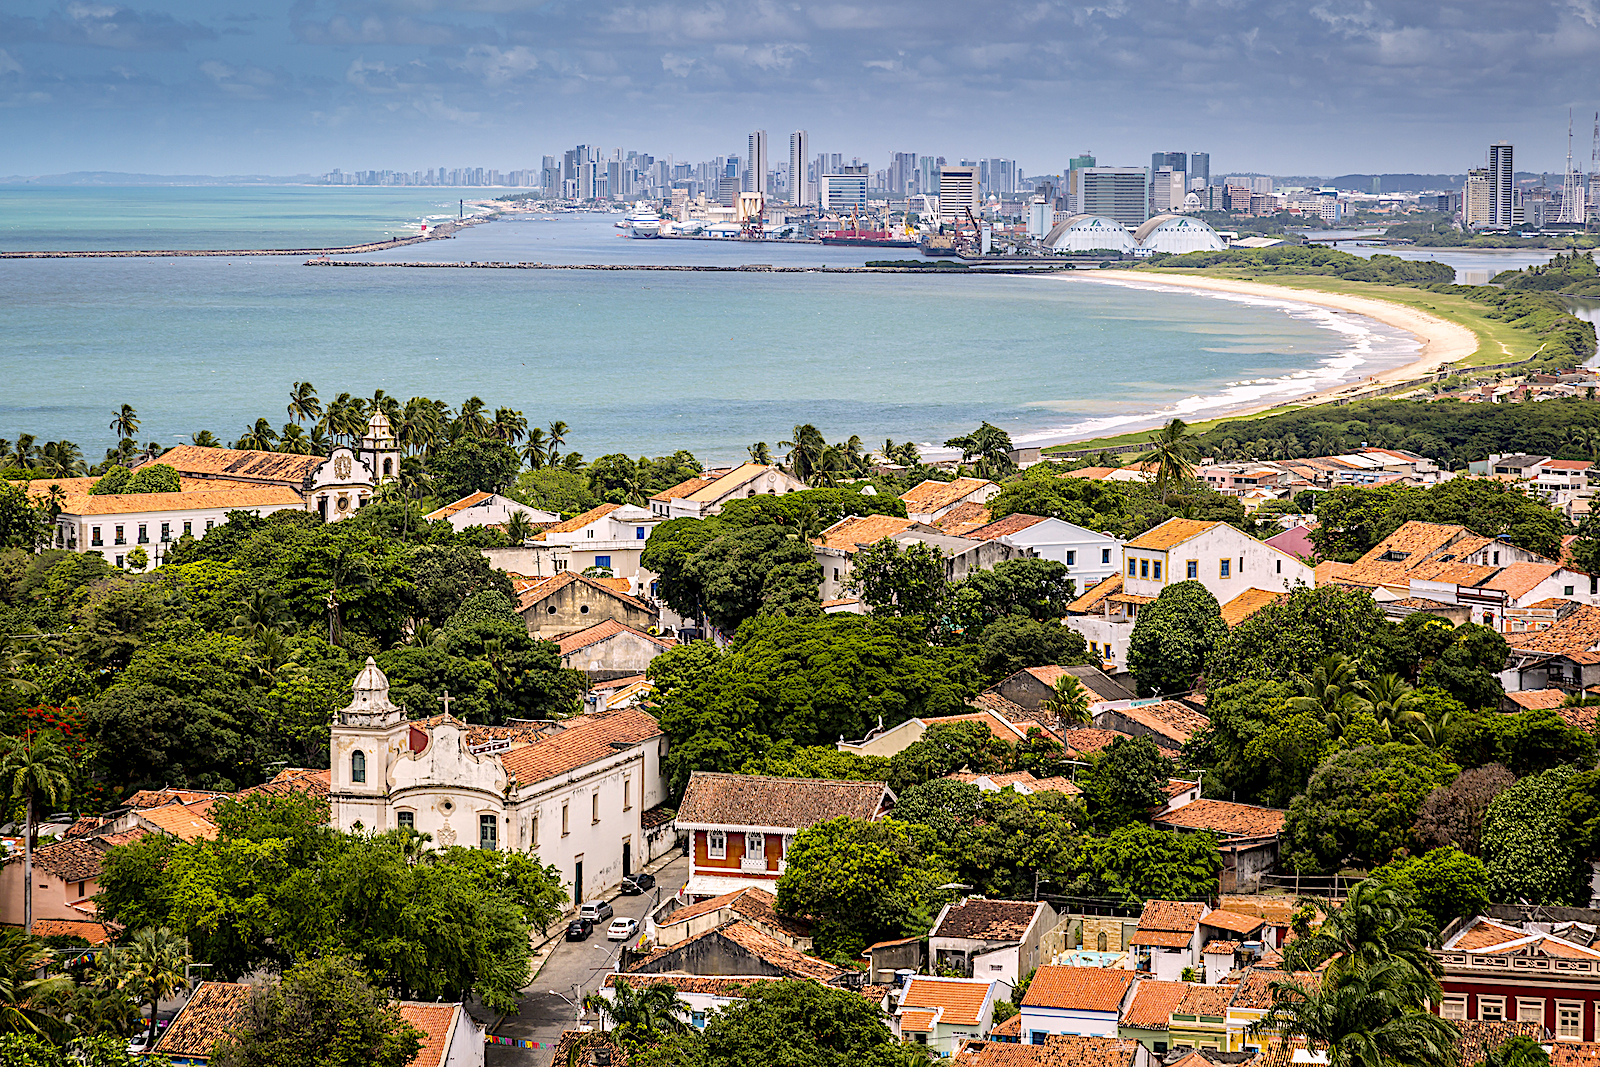 Colonial town of Olinda (just north of Recife) showcases Brazilian history